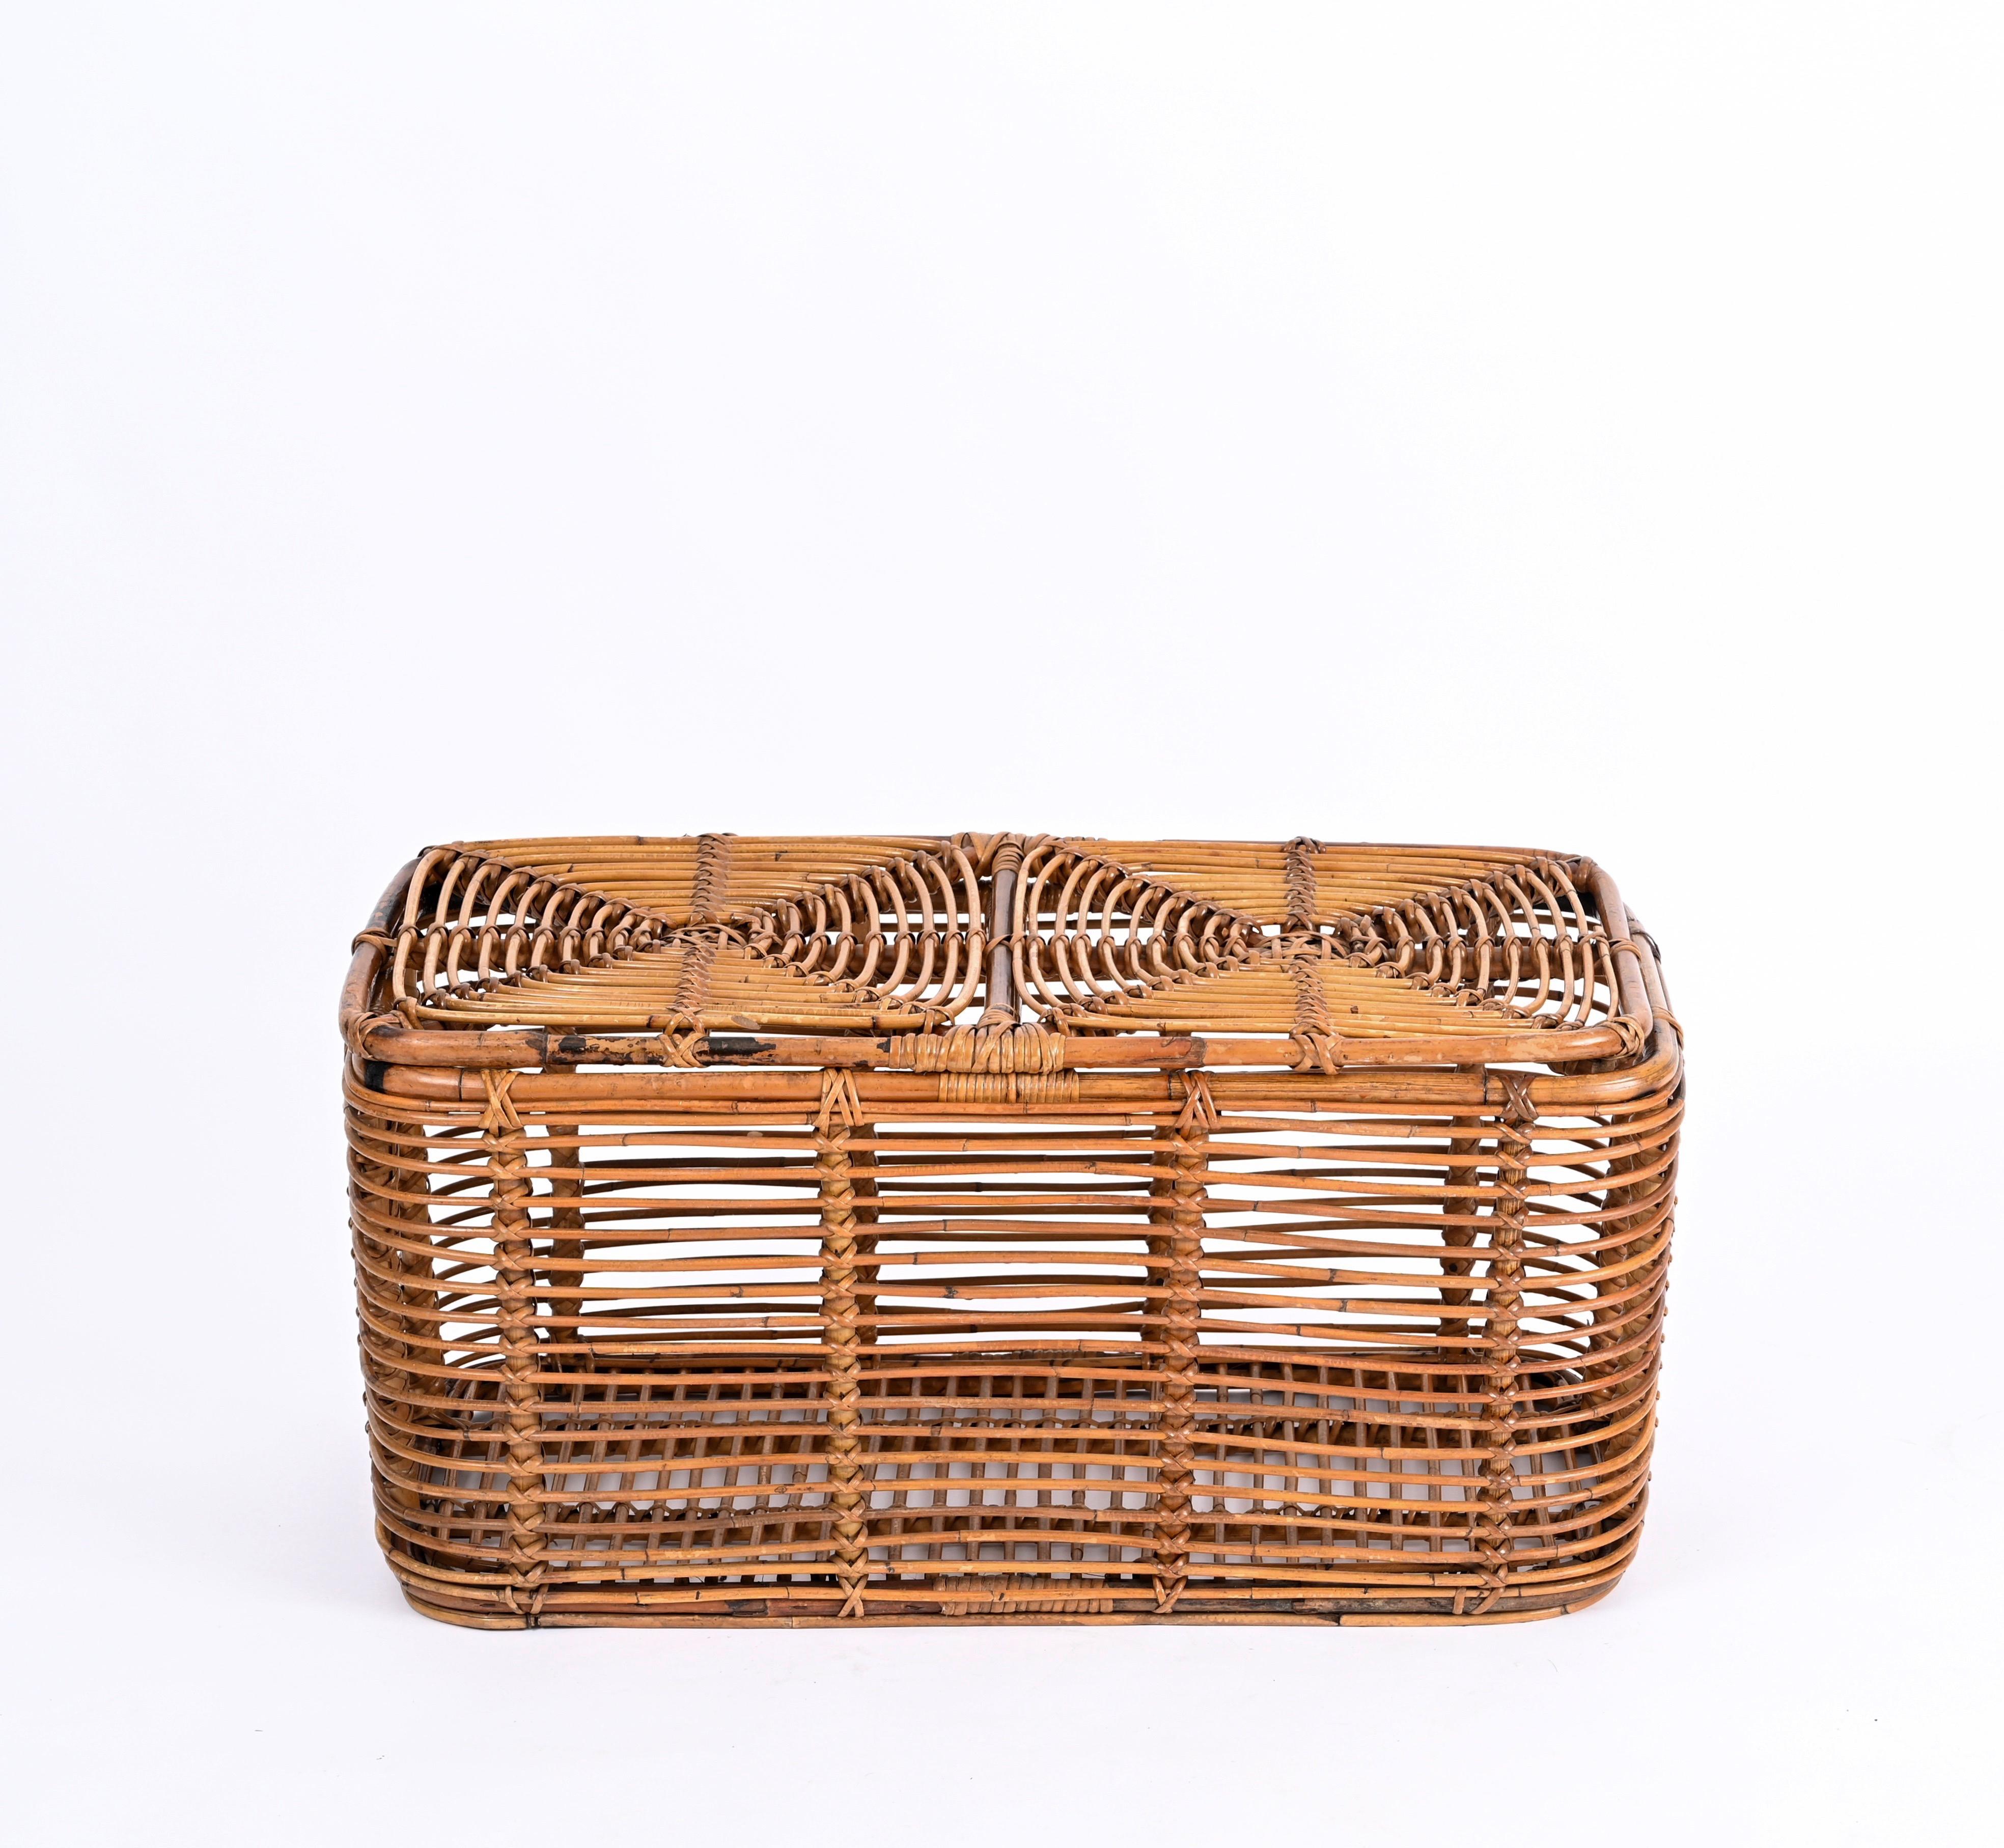 Midcentury French Riviera Bamboo and Woven Rattan Italian Basket, 1960s For Sale 2